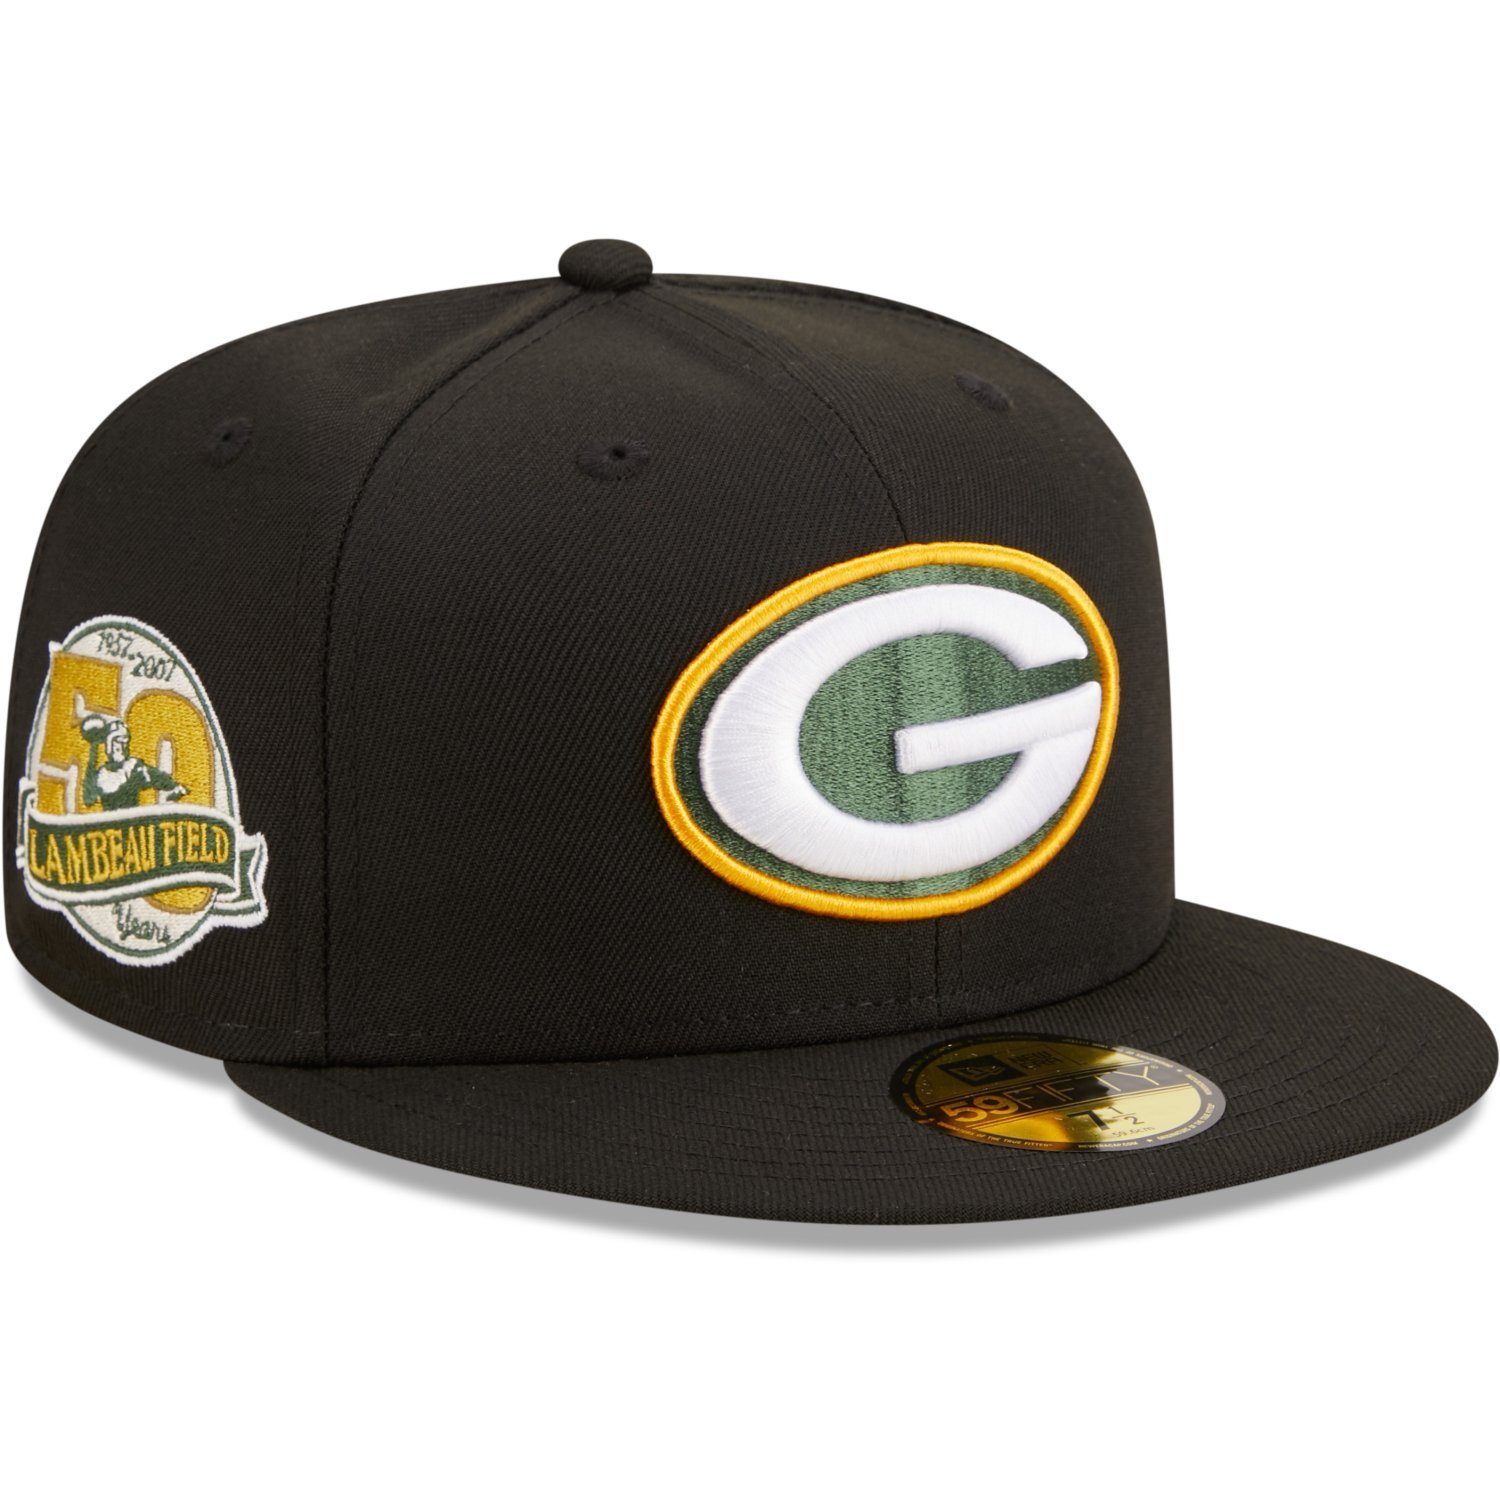 New Era Fitted Cap 59Fifty Green Bay Packers Lambeau Field | Fitted Caps